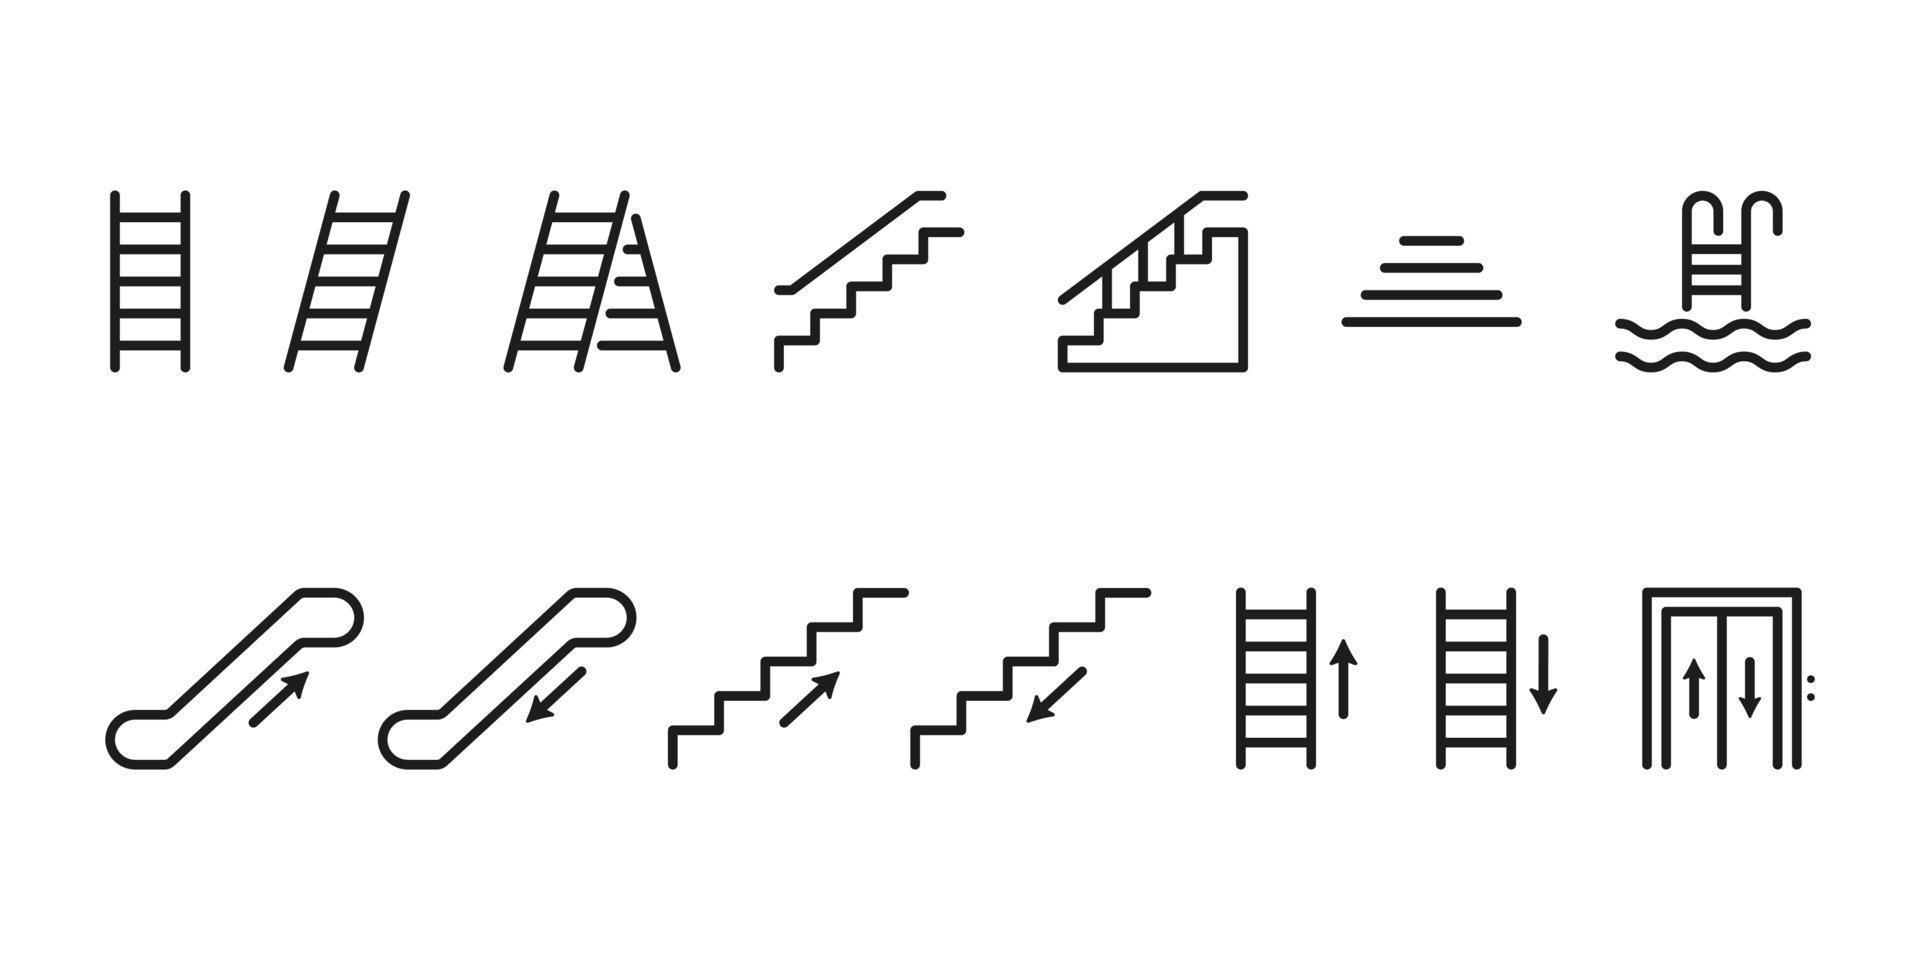 Set of Staircases Line Icon. Climb Up or Go Down on Steps. Stairs Linear Pictogram. Ladder, Elevator, Stairway, Escalator, Pool Stair Outline Icon. Isolated Vector Illustration.